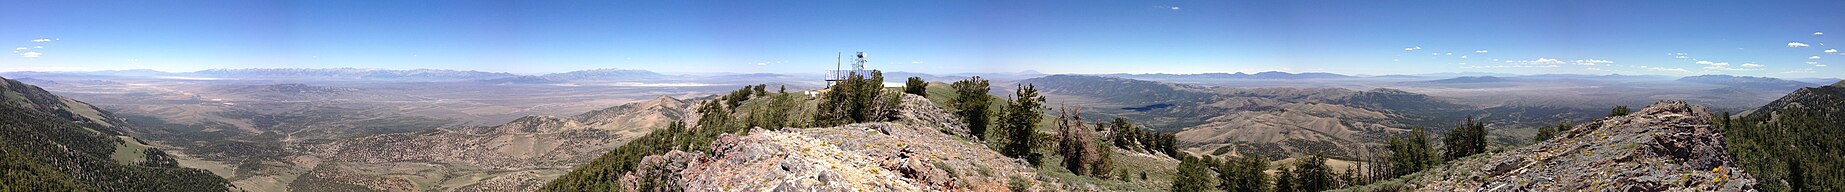 View from Spruce Mountain, Nevada.